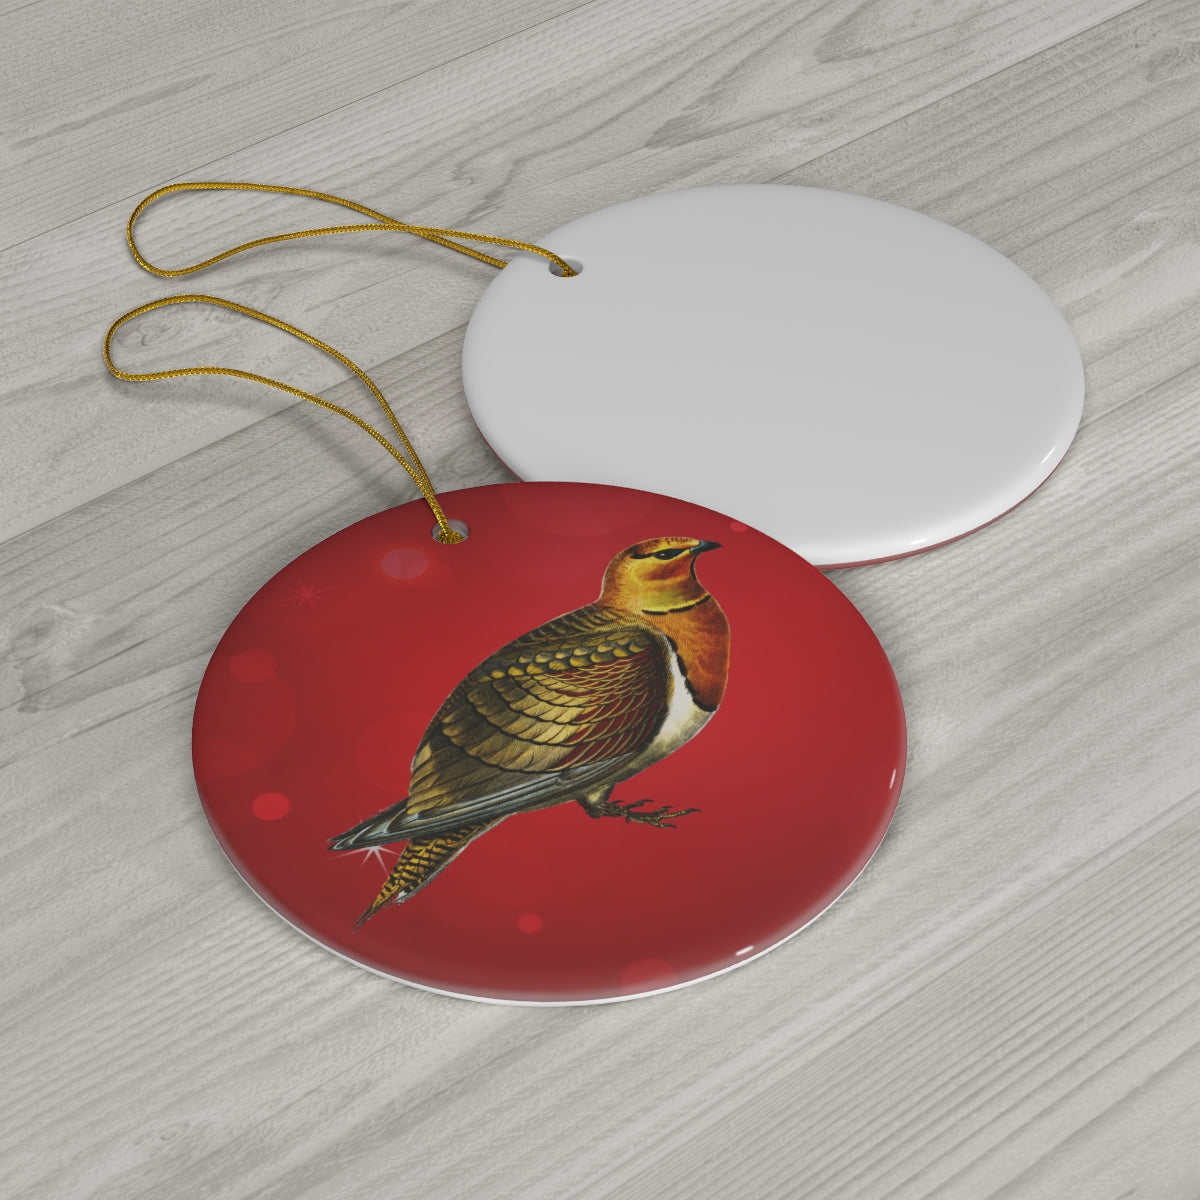 Saucy Sand Grouse Standard Ceramic Ornament, 4 Shapes